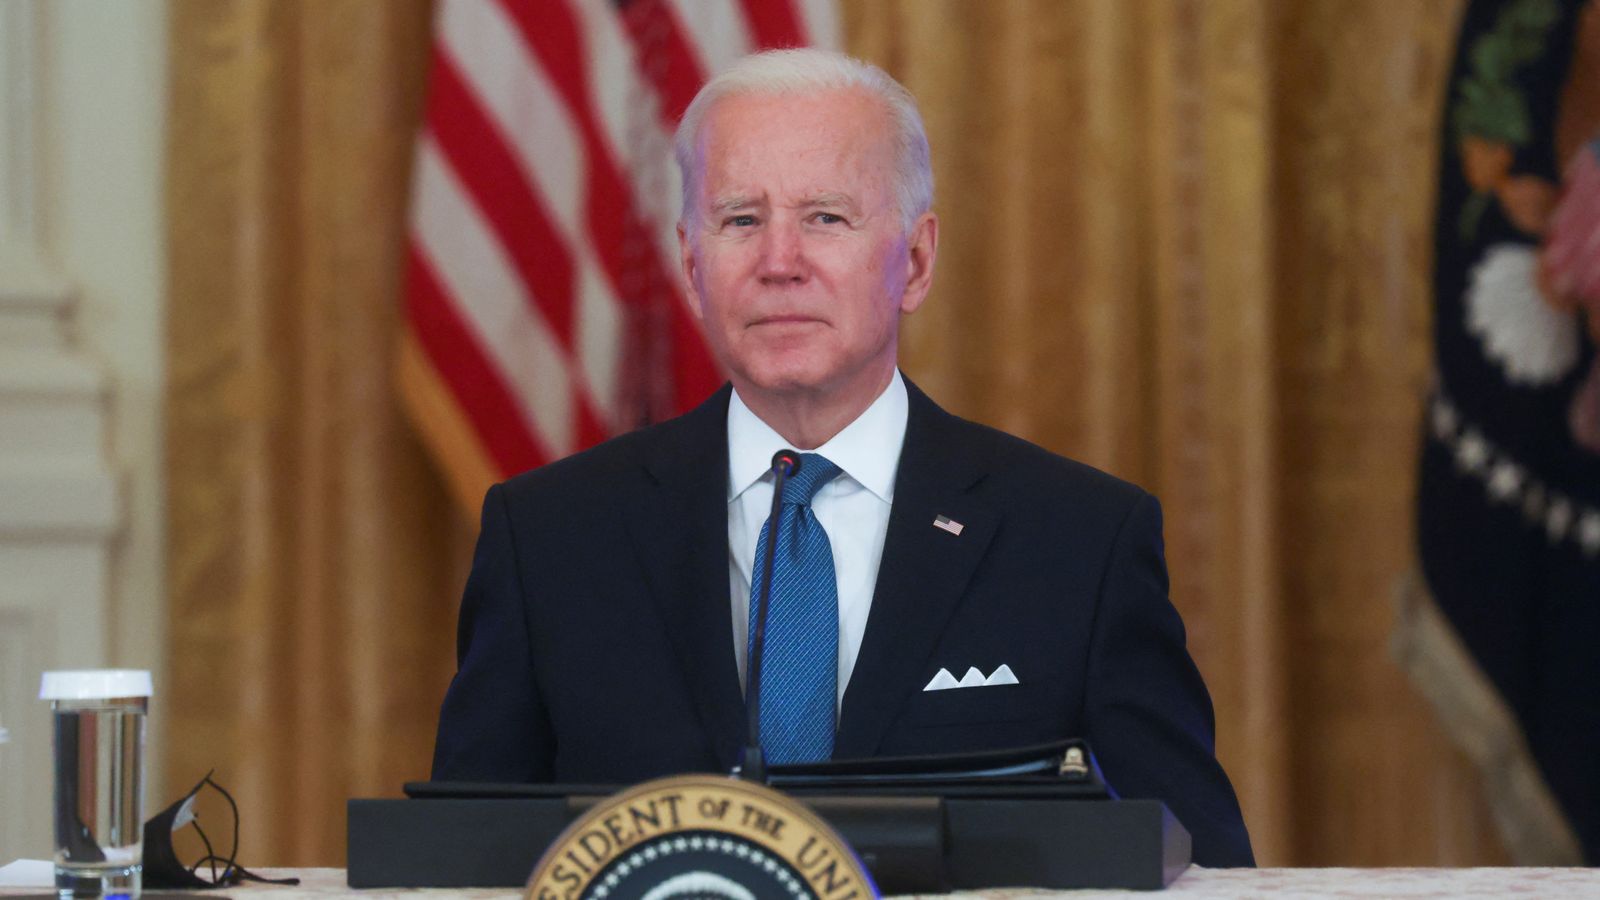 US President Joe Biden caught calling reporter a 'stupid son of a b***h' at news conference - Sky News